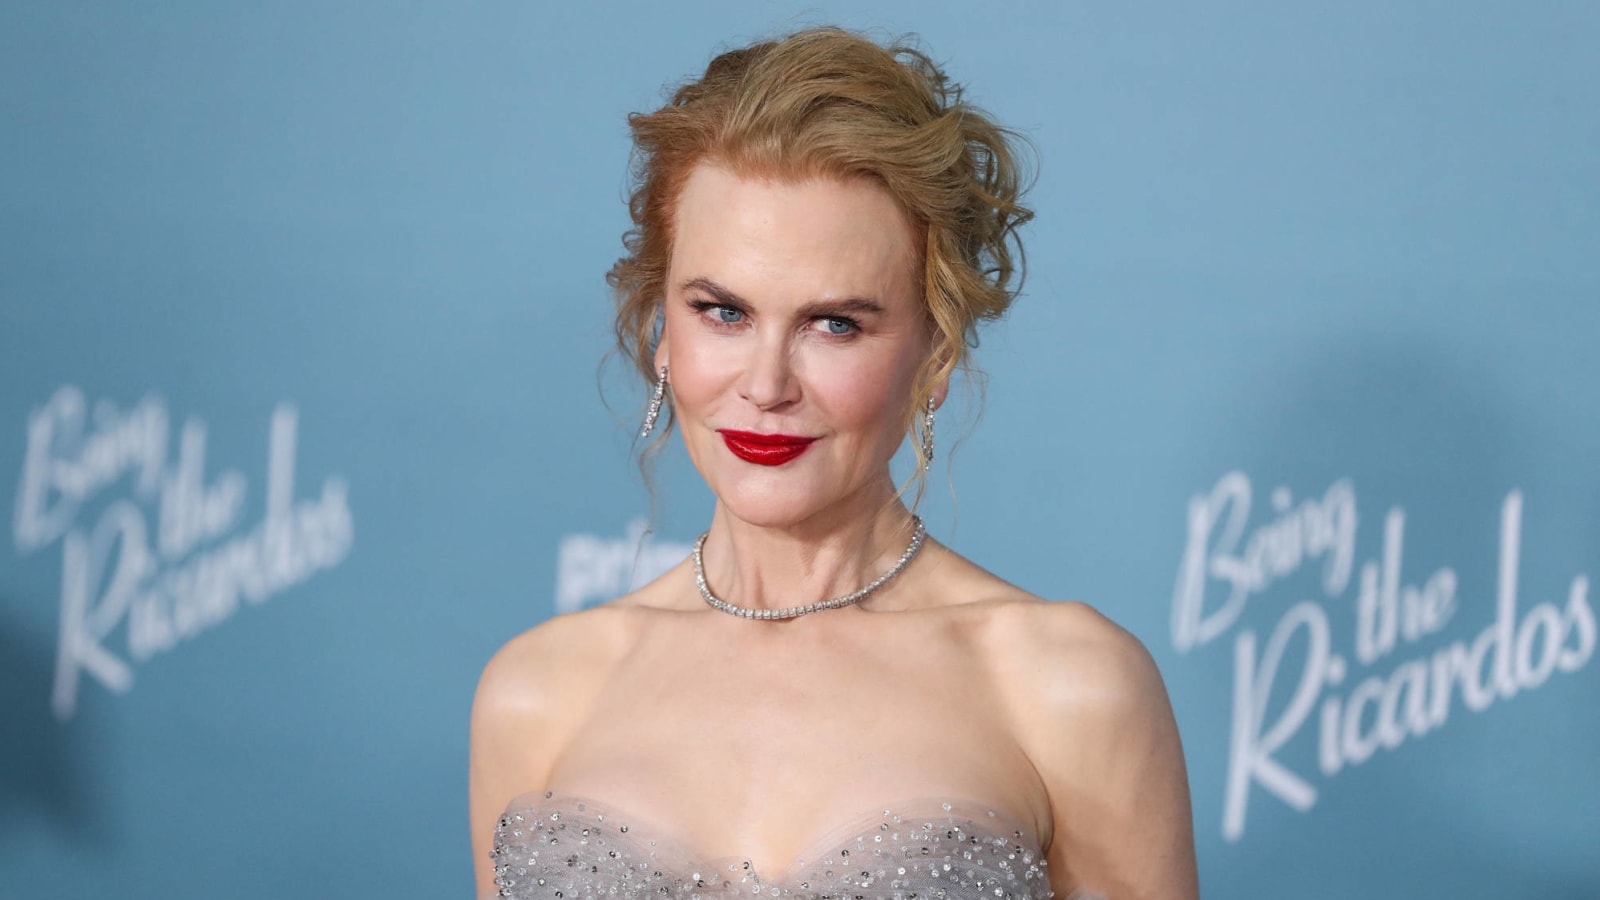 Nicole Kidman was supposed to starr in 'Panic Room'